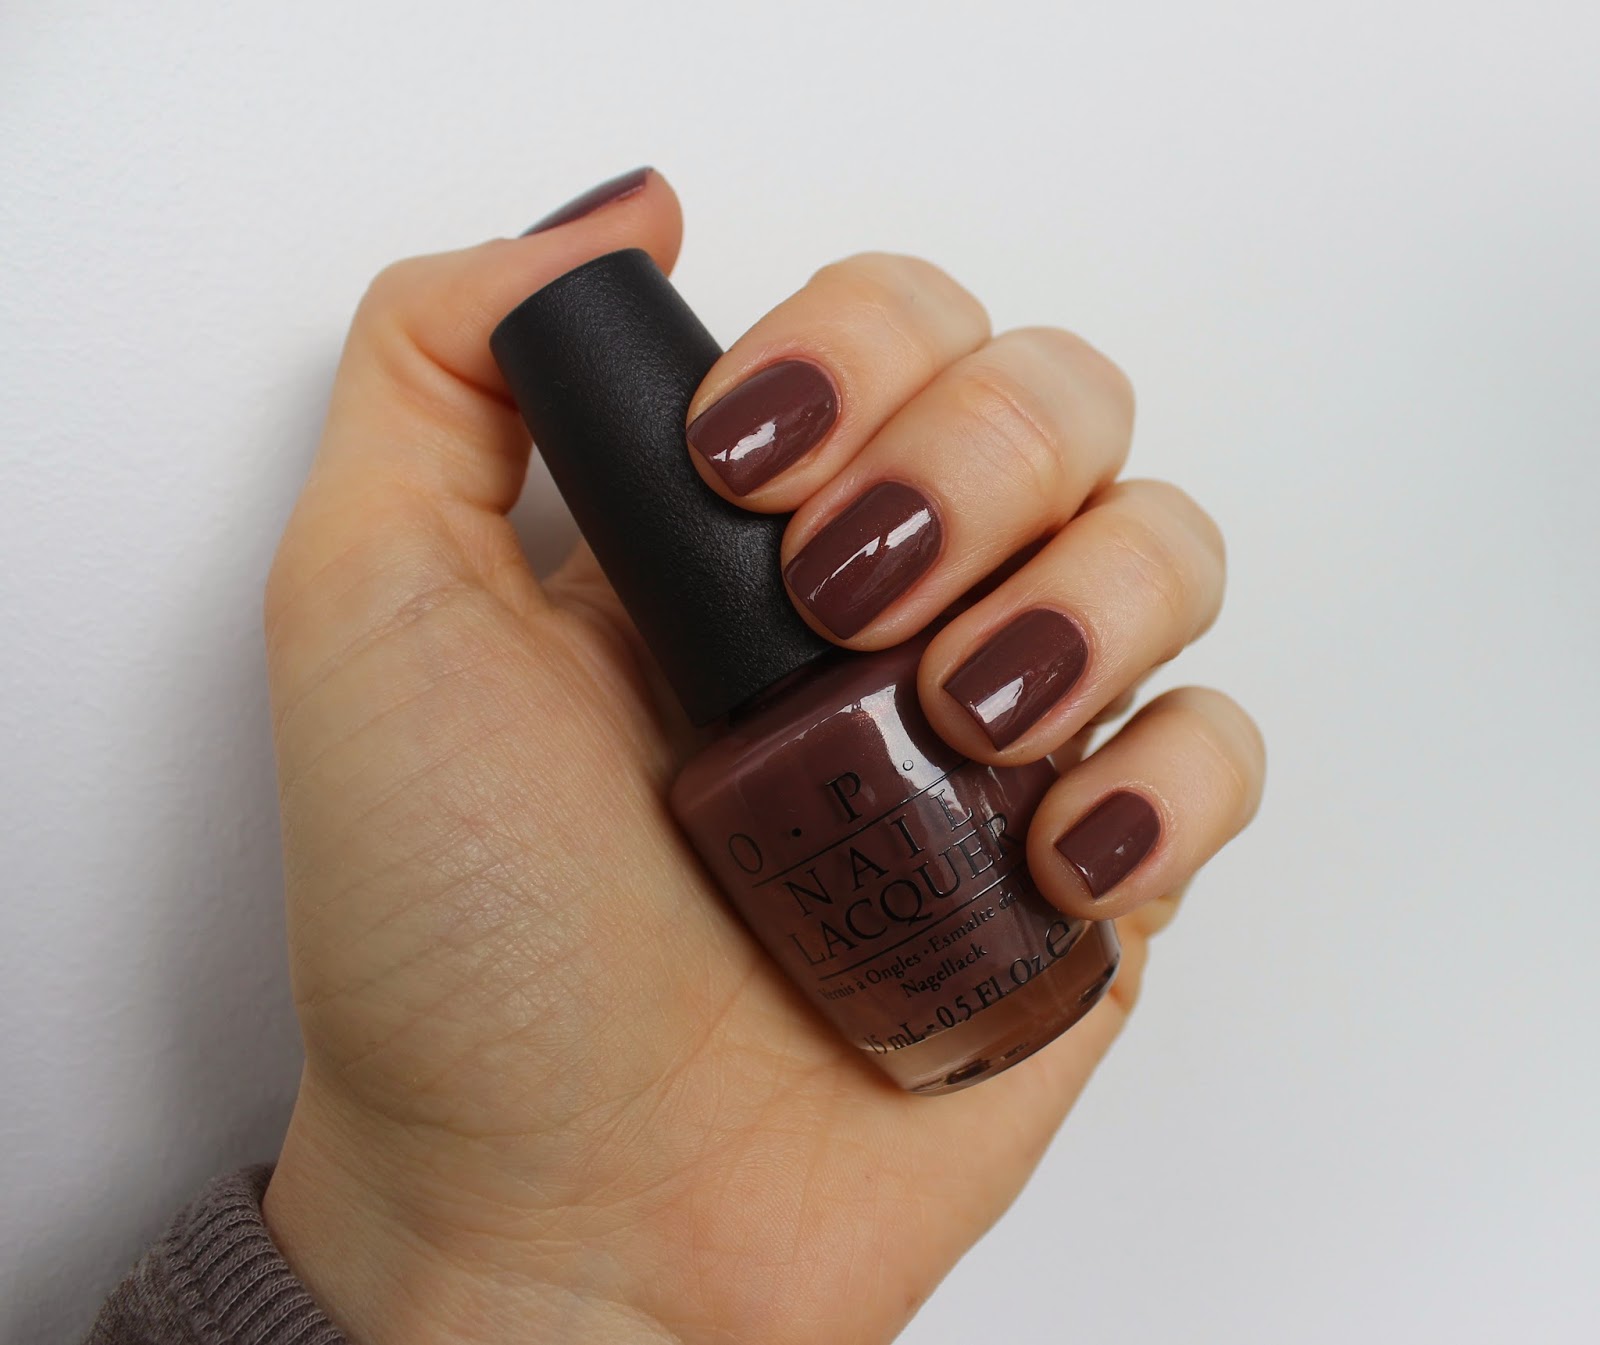 OPI Nail Lacquer NL H64 Wooden shoe like to know?